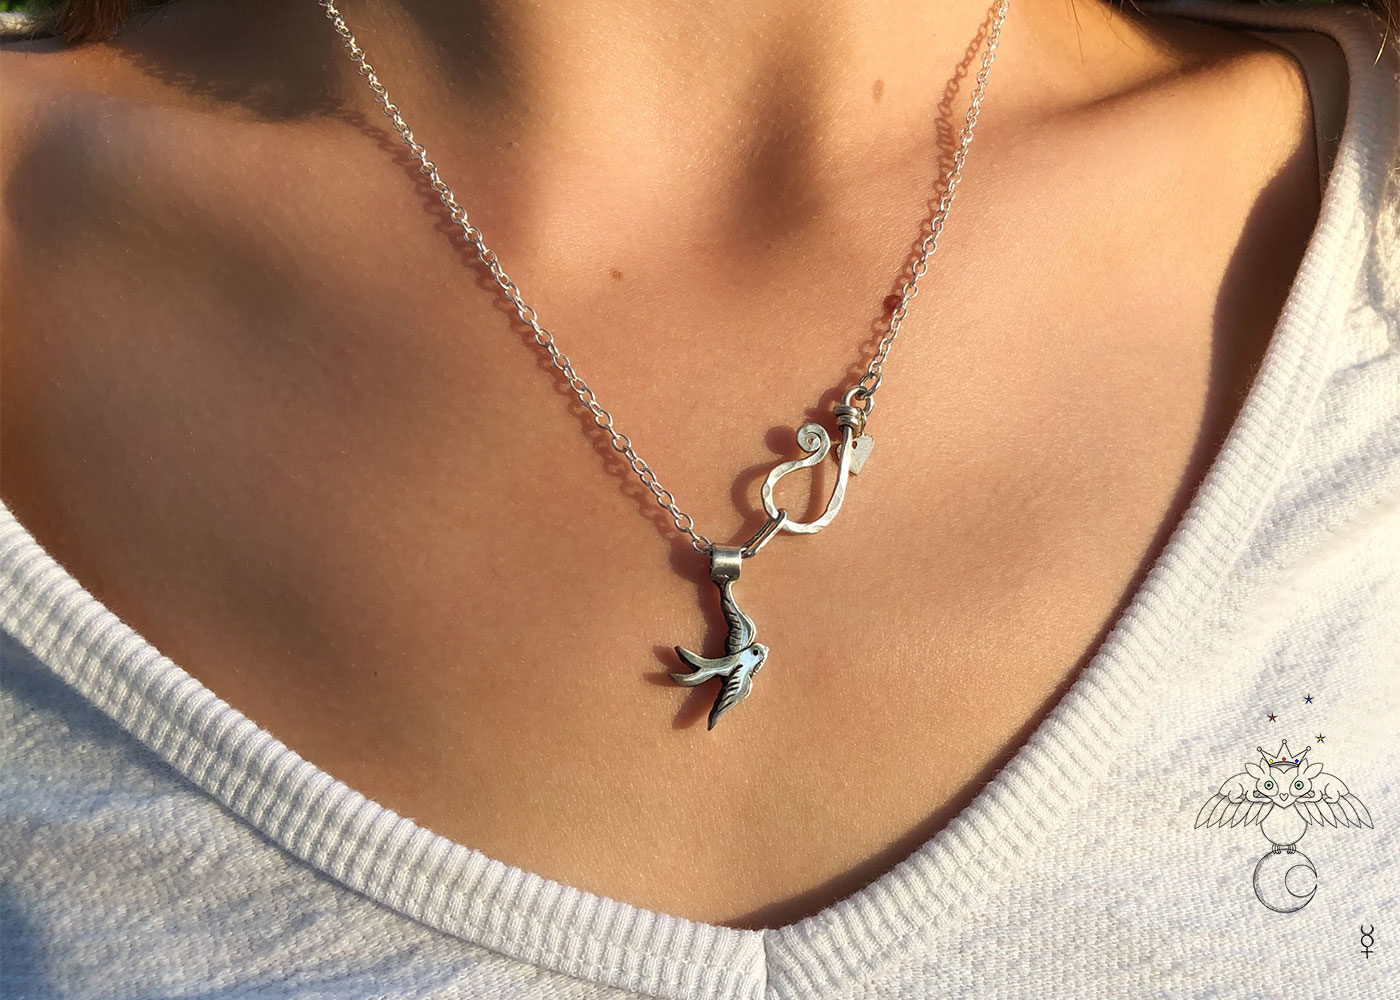 Silver Swallow necklace handmade and recycled ethical jewellery made by independent artisan jeweller. Coin jewellery by Hairy Growler